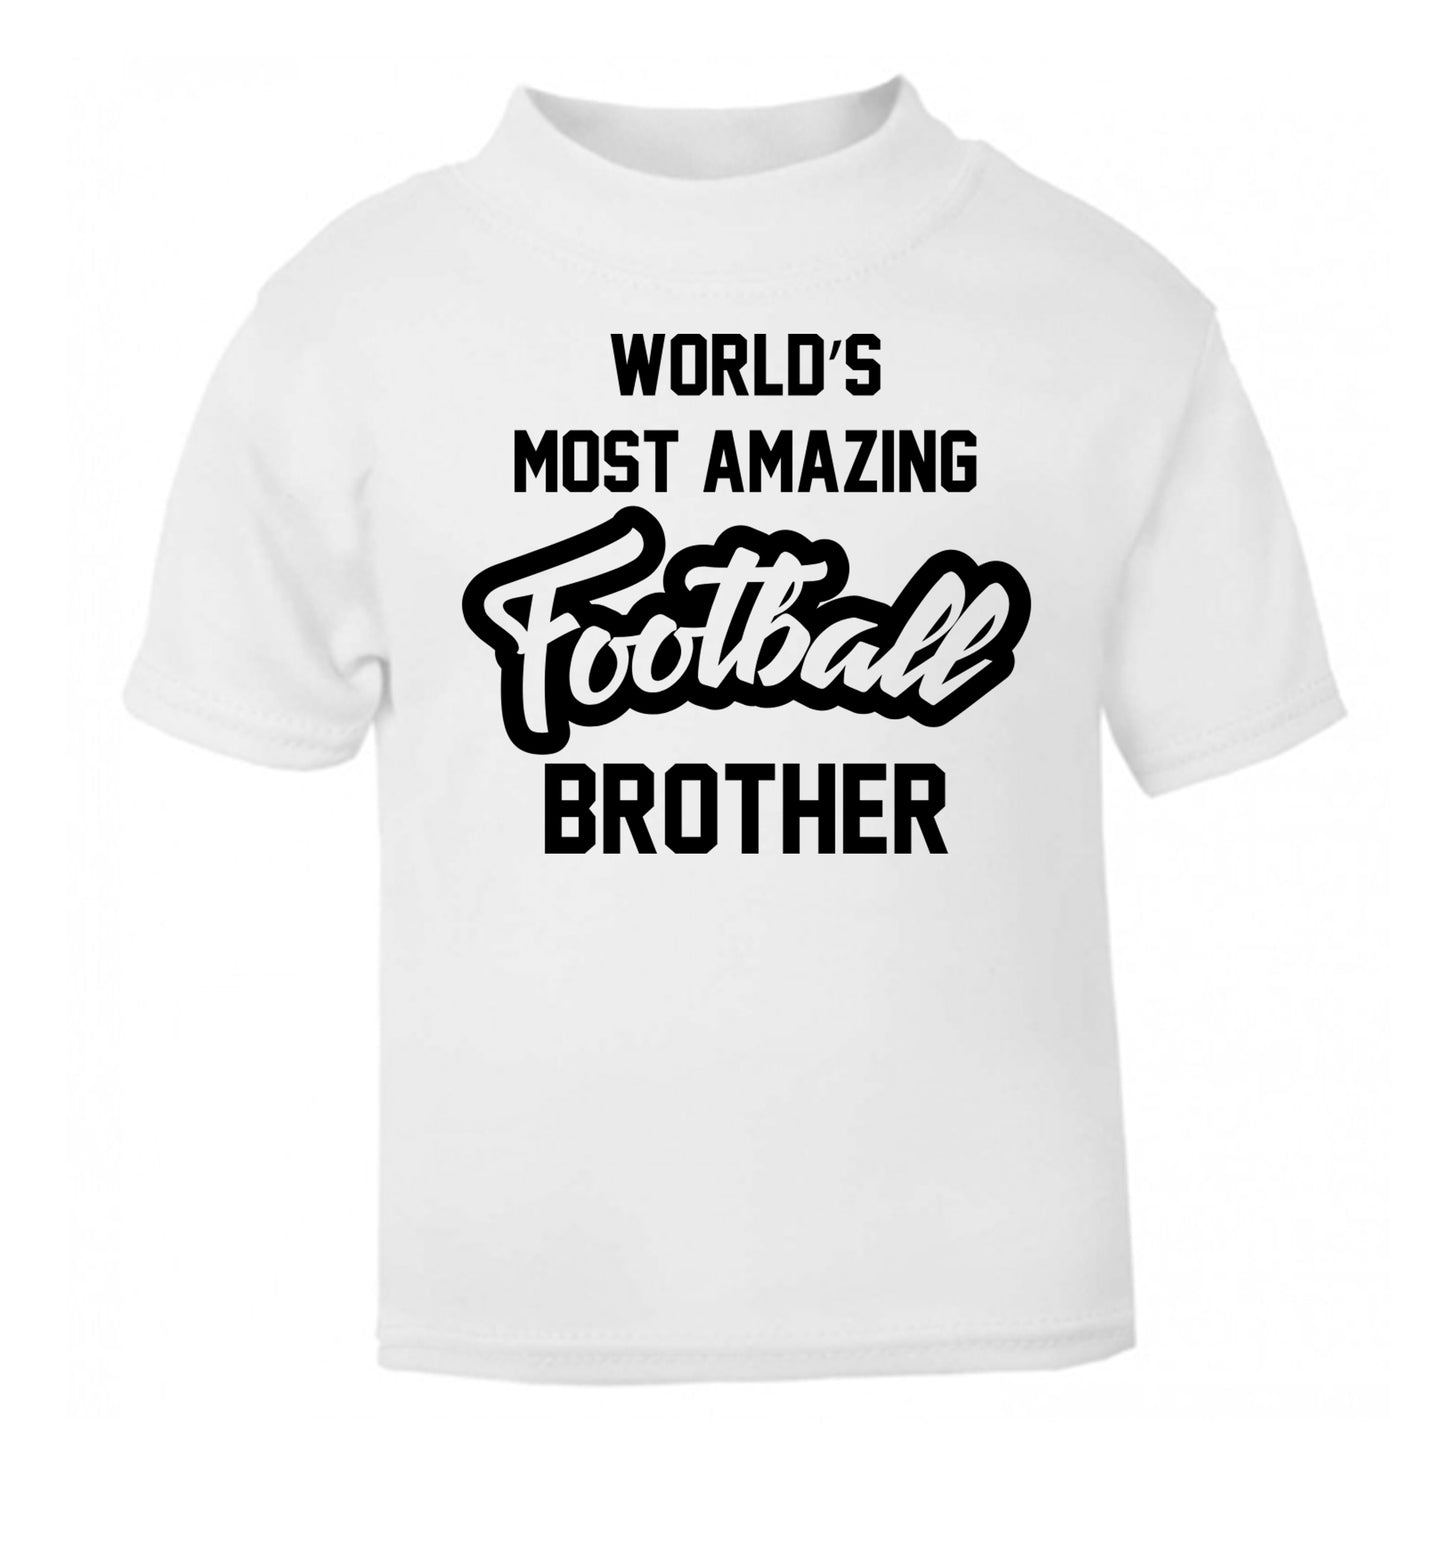 Worlds most amazing football brother white Baby Toddler Tshirt 2 Years